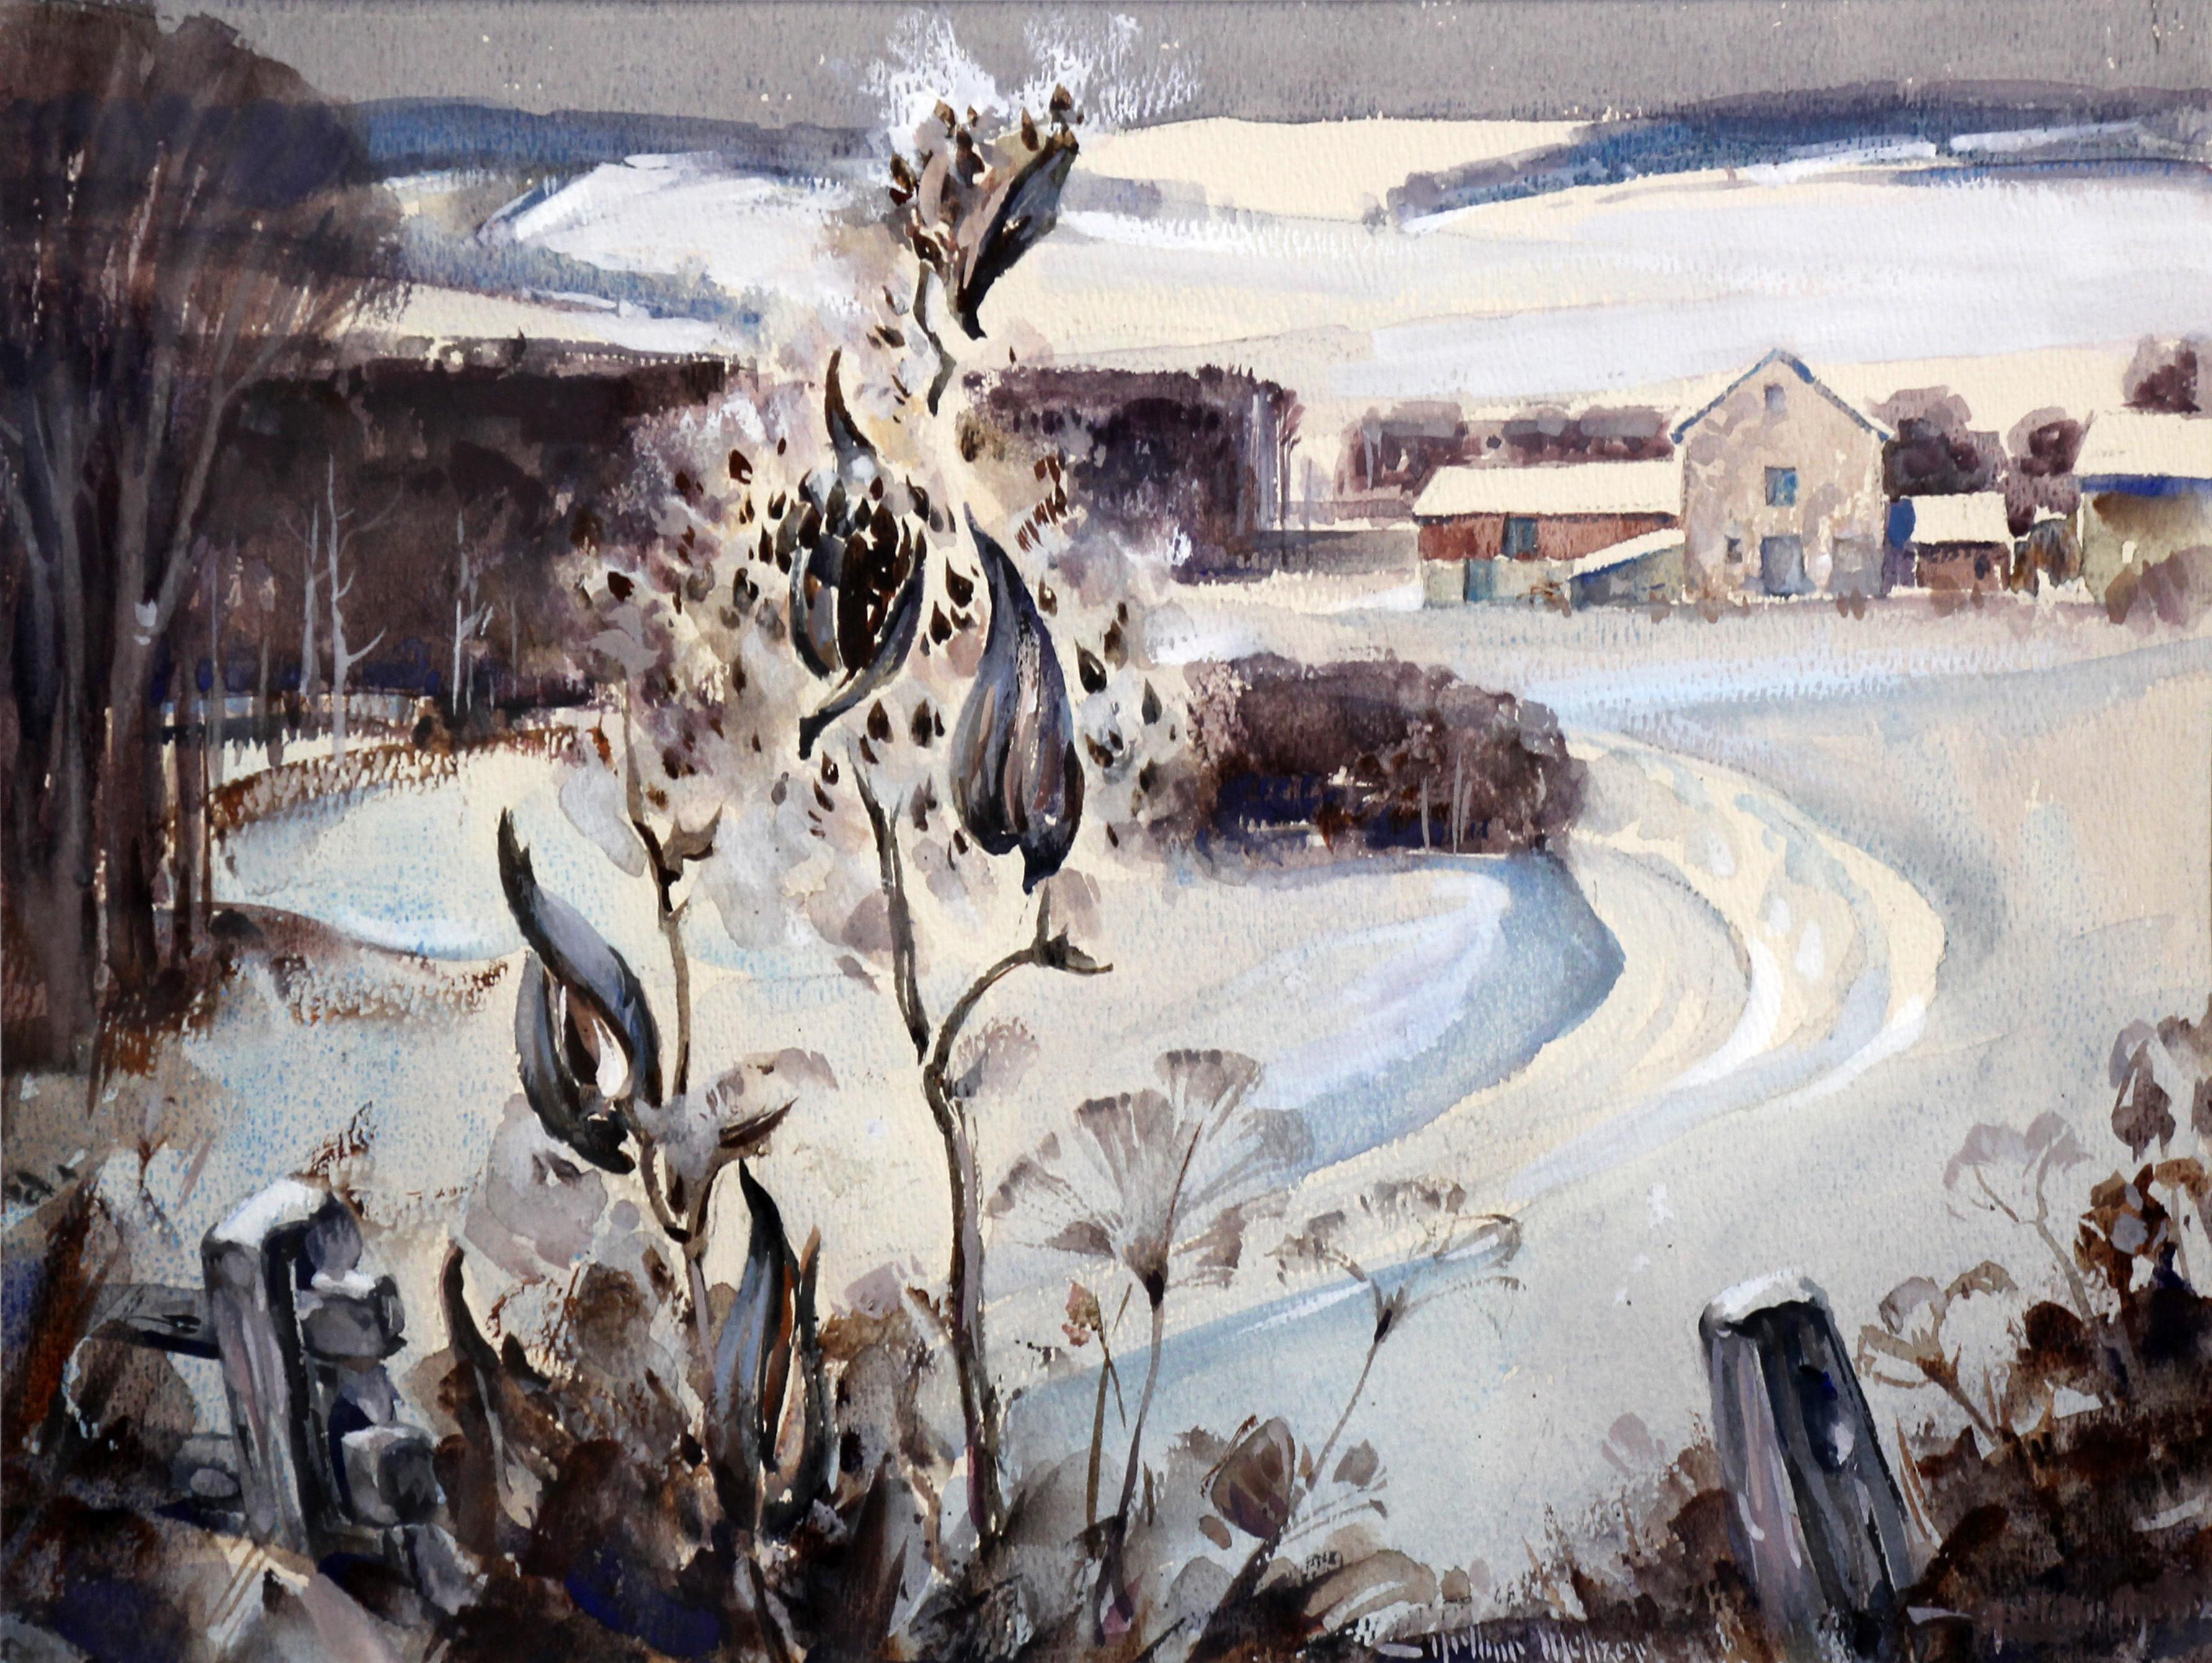 Aesclepius in Foreground, Winter Landscape by Pennsylvania Impressionist